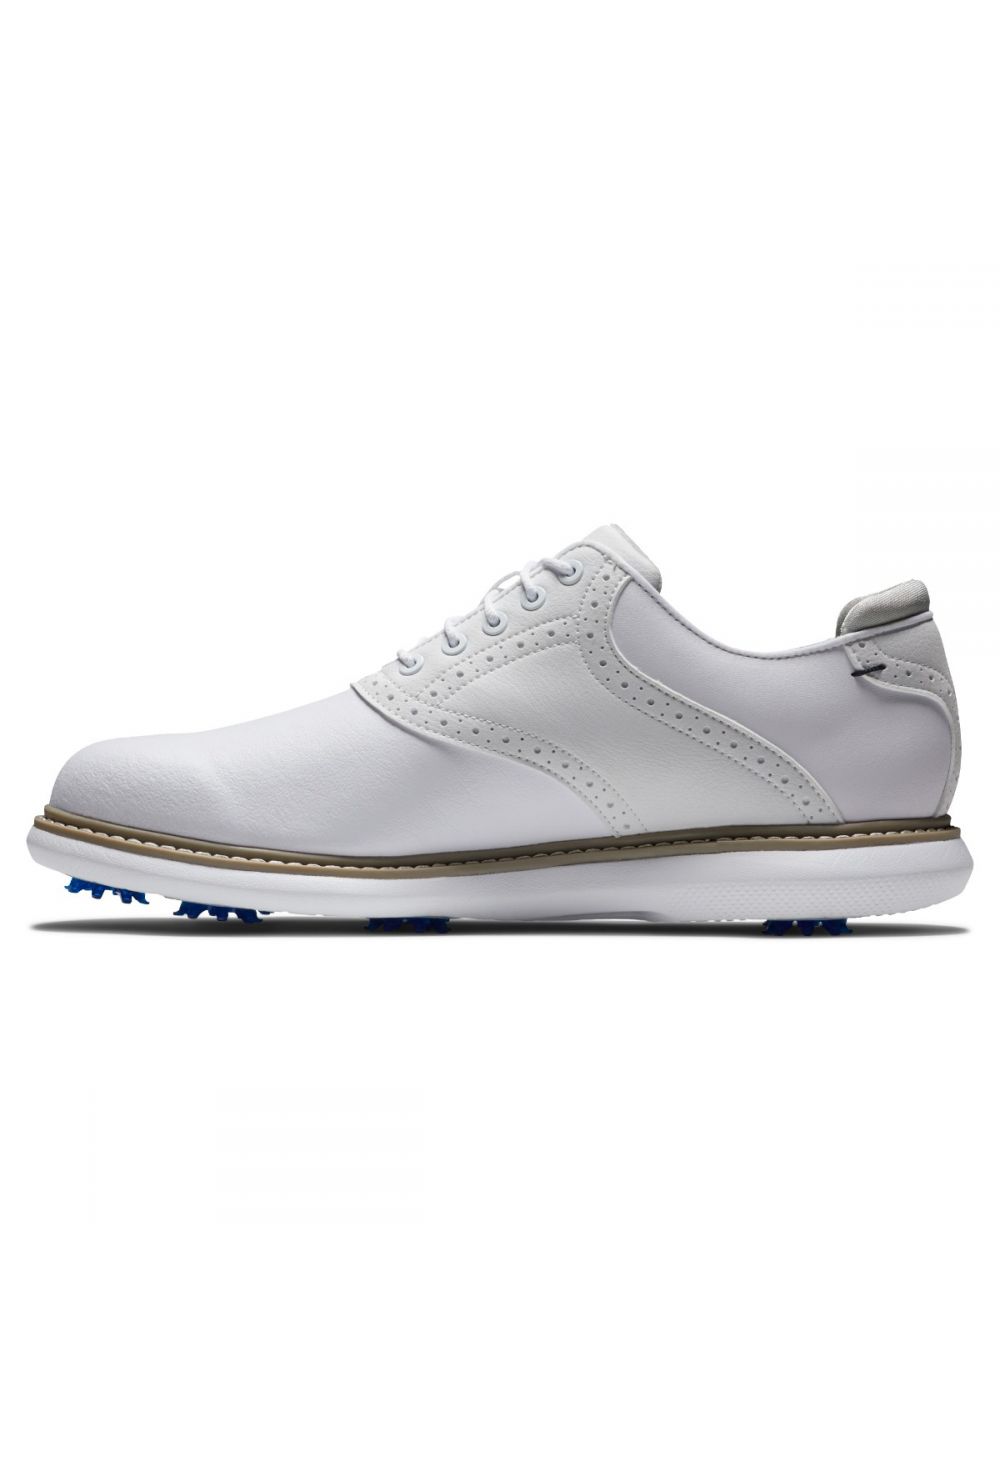 Footjoy Traditions Golf Shoes 57903 White